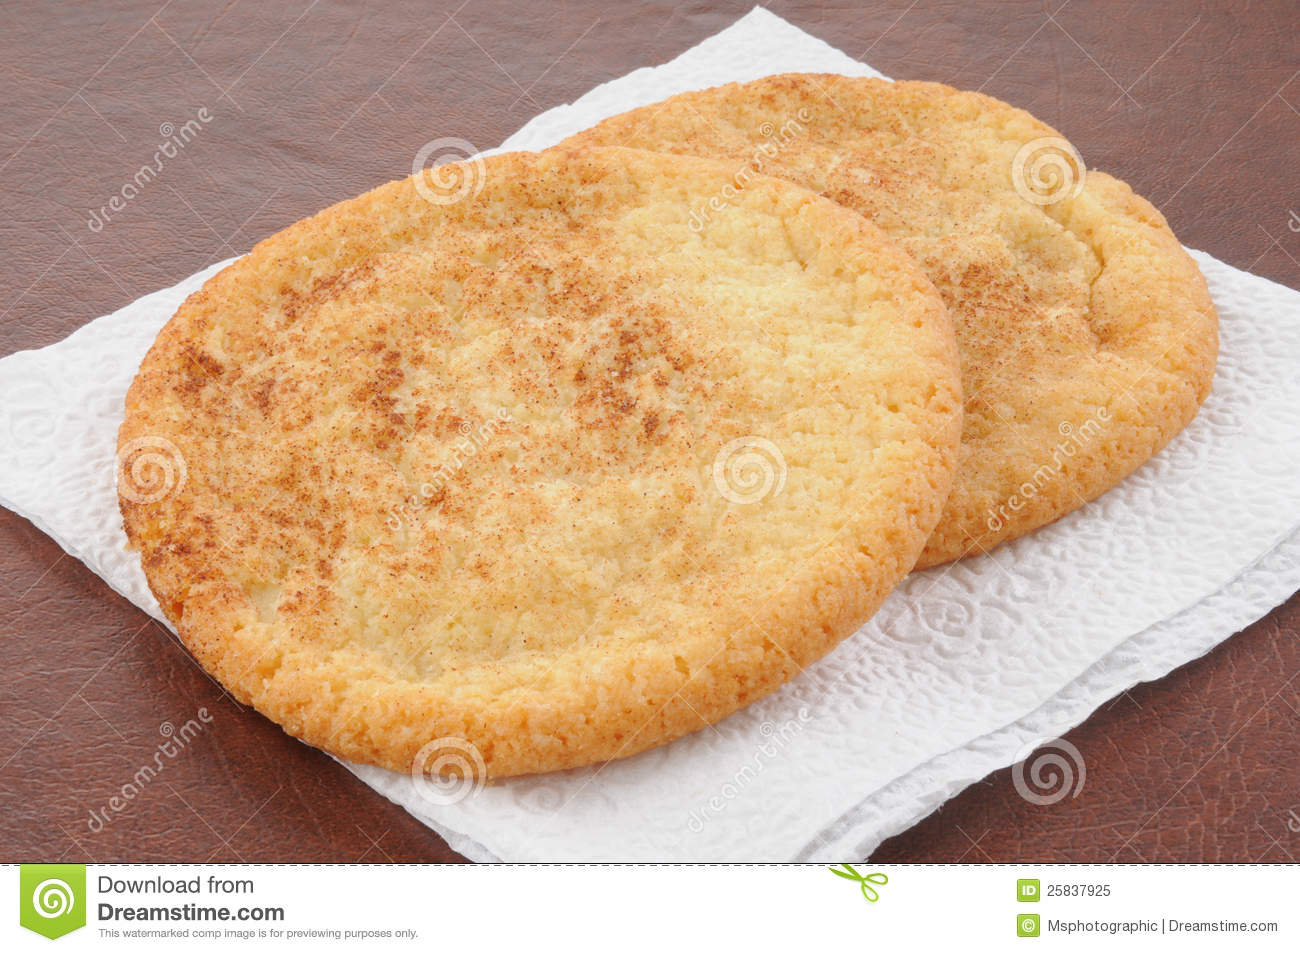 Snickerdoodle Cookies Royalty Free Stock Photo   Image  25837925